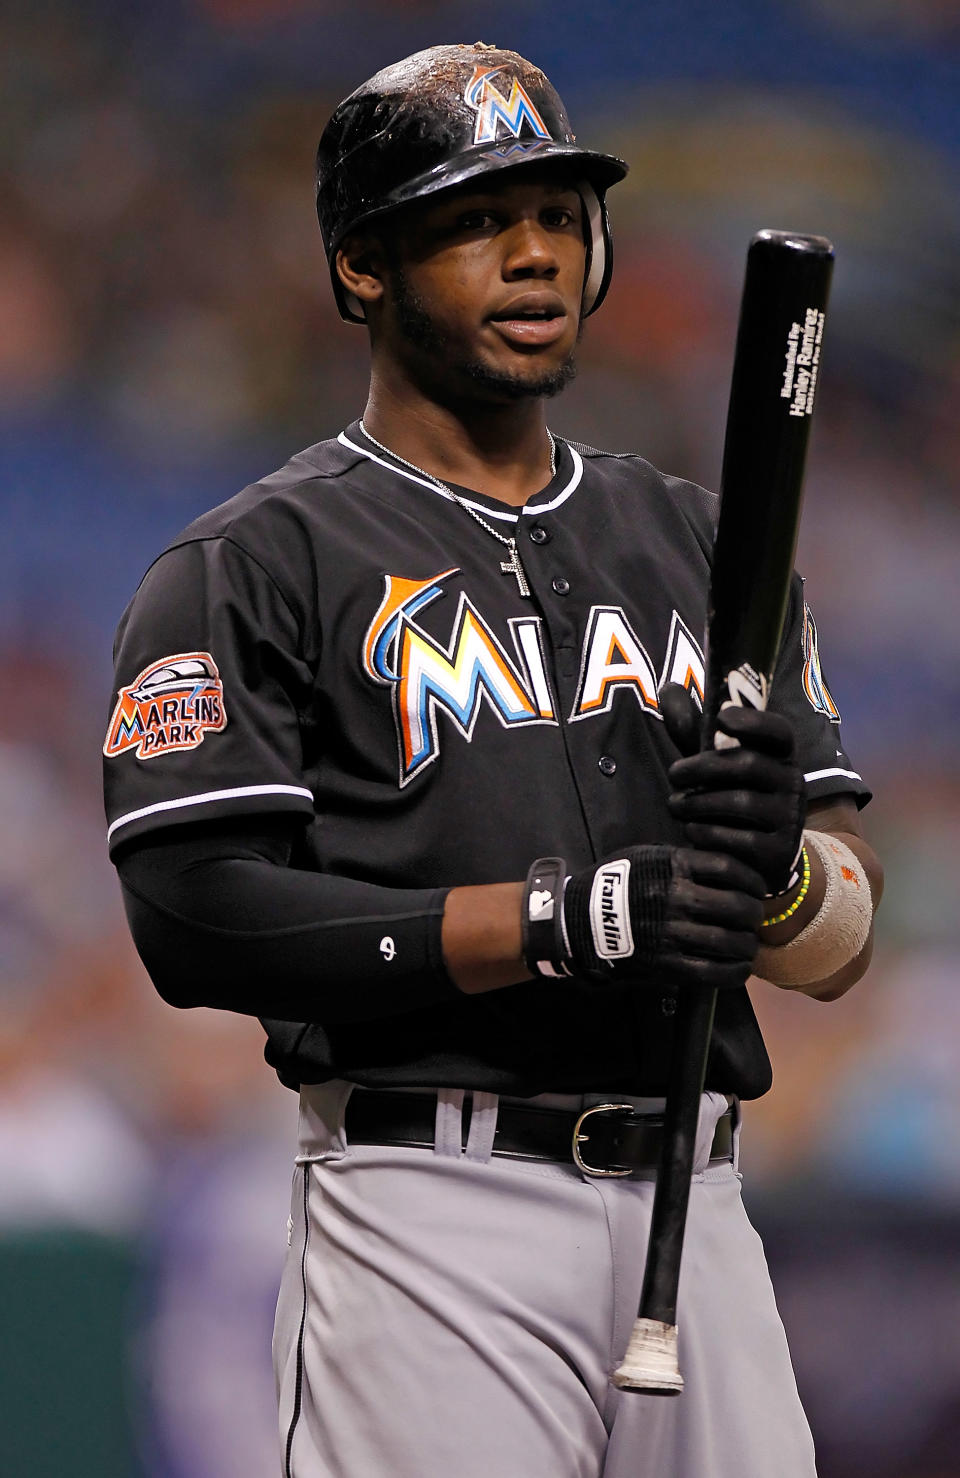 ST. PETERSBURG - JUNE 16: Infielder Hanley Ramirez #2 of the Miami Marlins bats against the Tampa Bay Rays during the game at Tropicana Field on June 16, 2012 in St. Petersburg, Florida. (Photo by J. Meric/Getty Images)